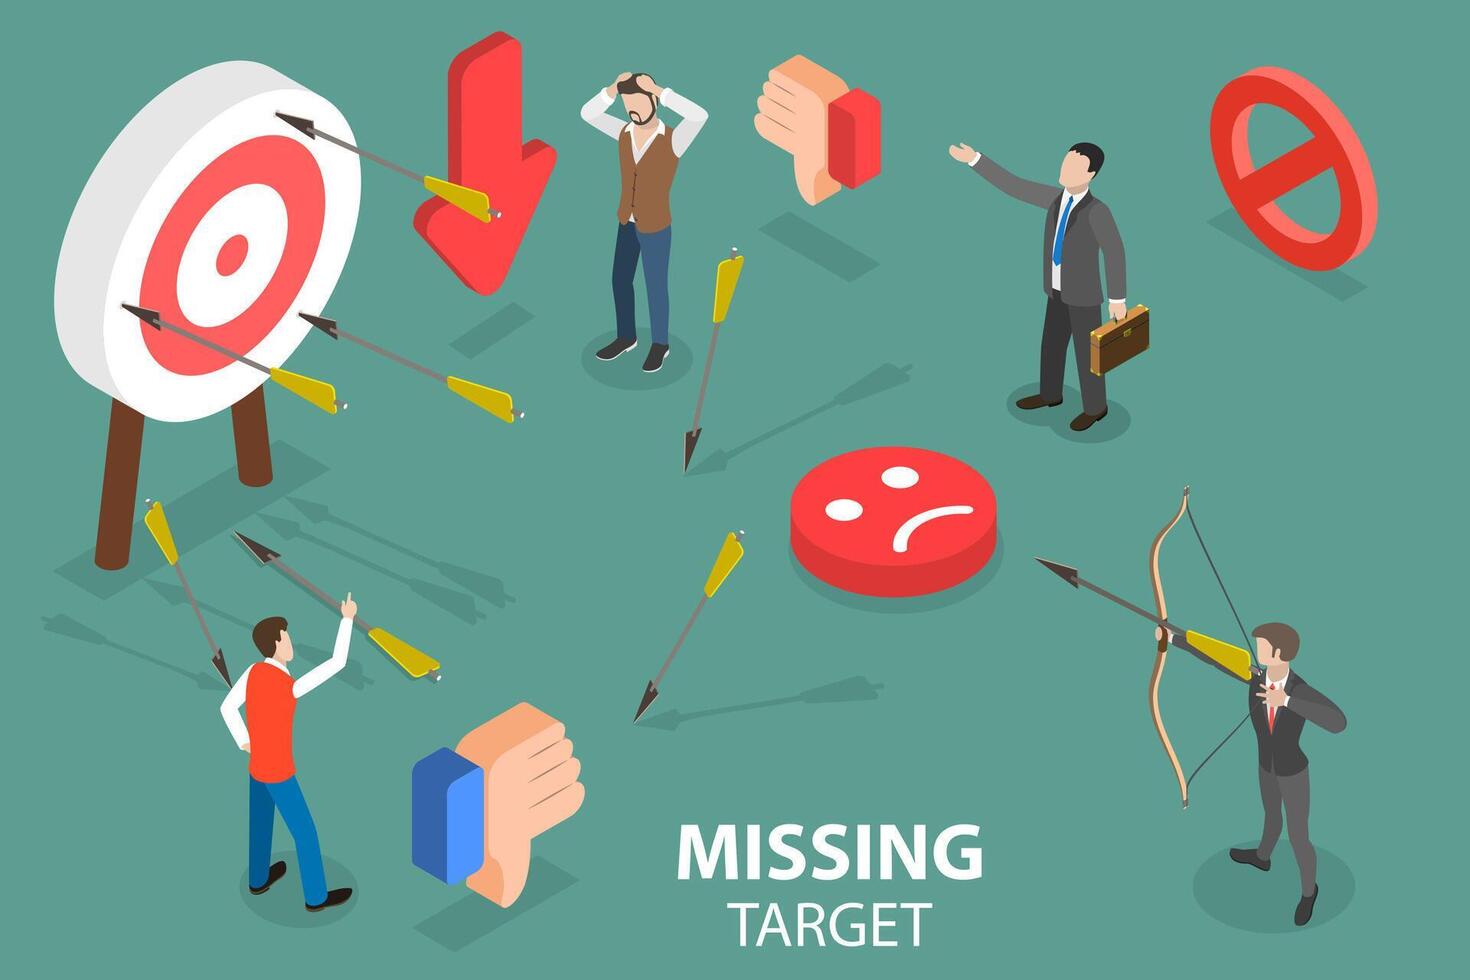 3D Isometric Flat Vector Conceptual Illustration of Missing Target.